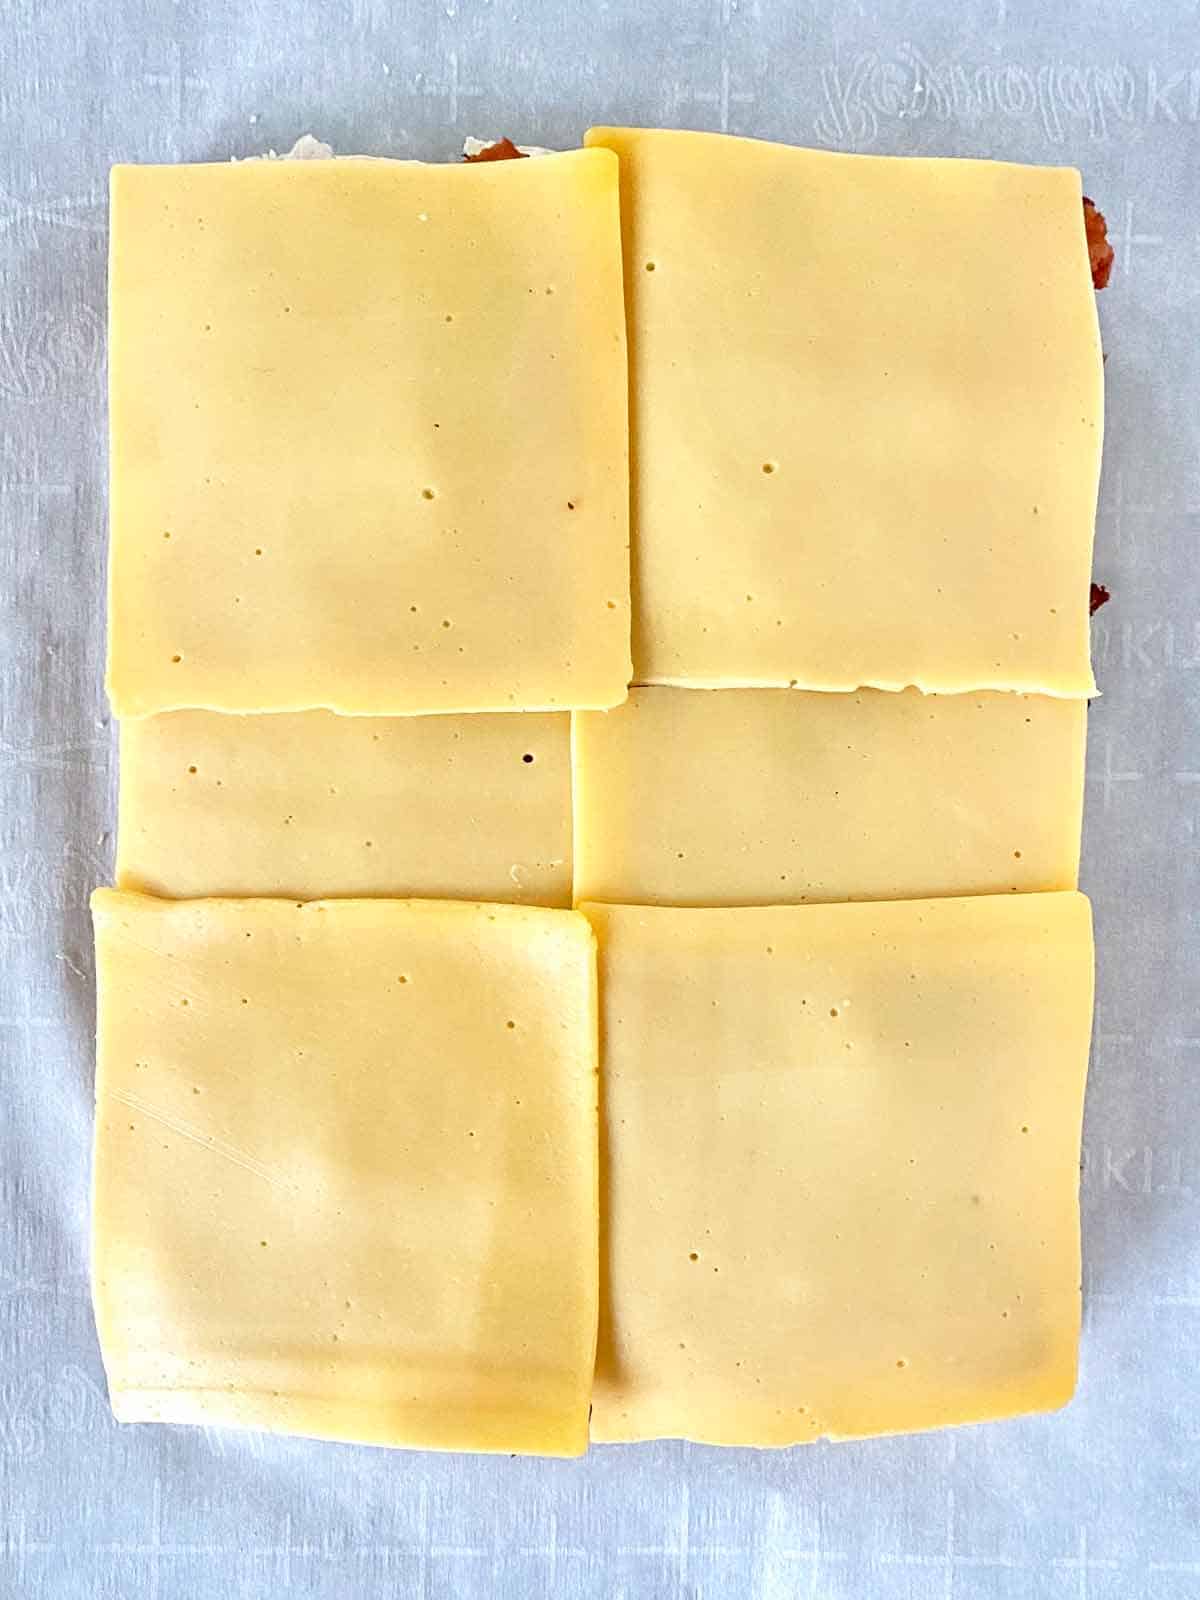 Cheese slices layered on the sliders.